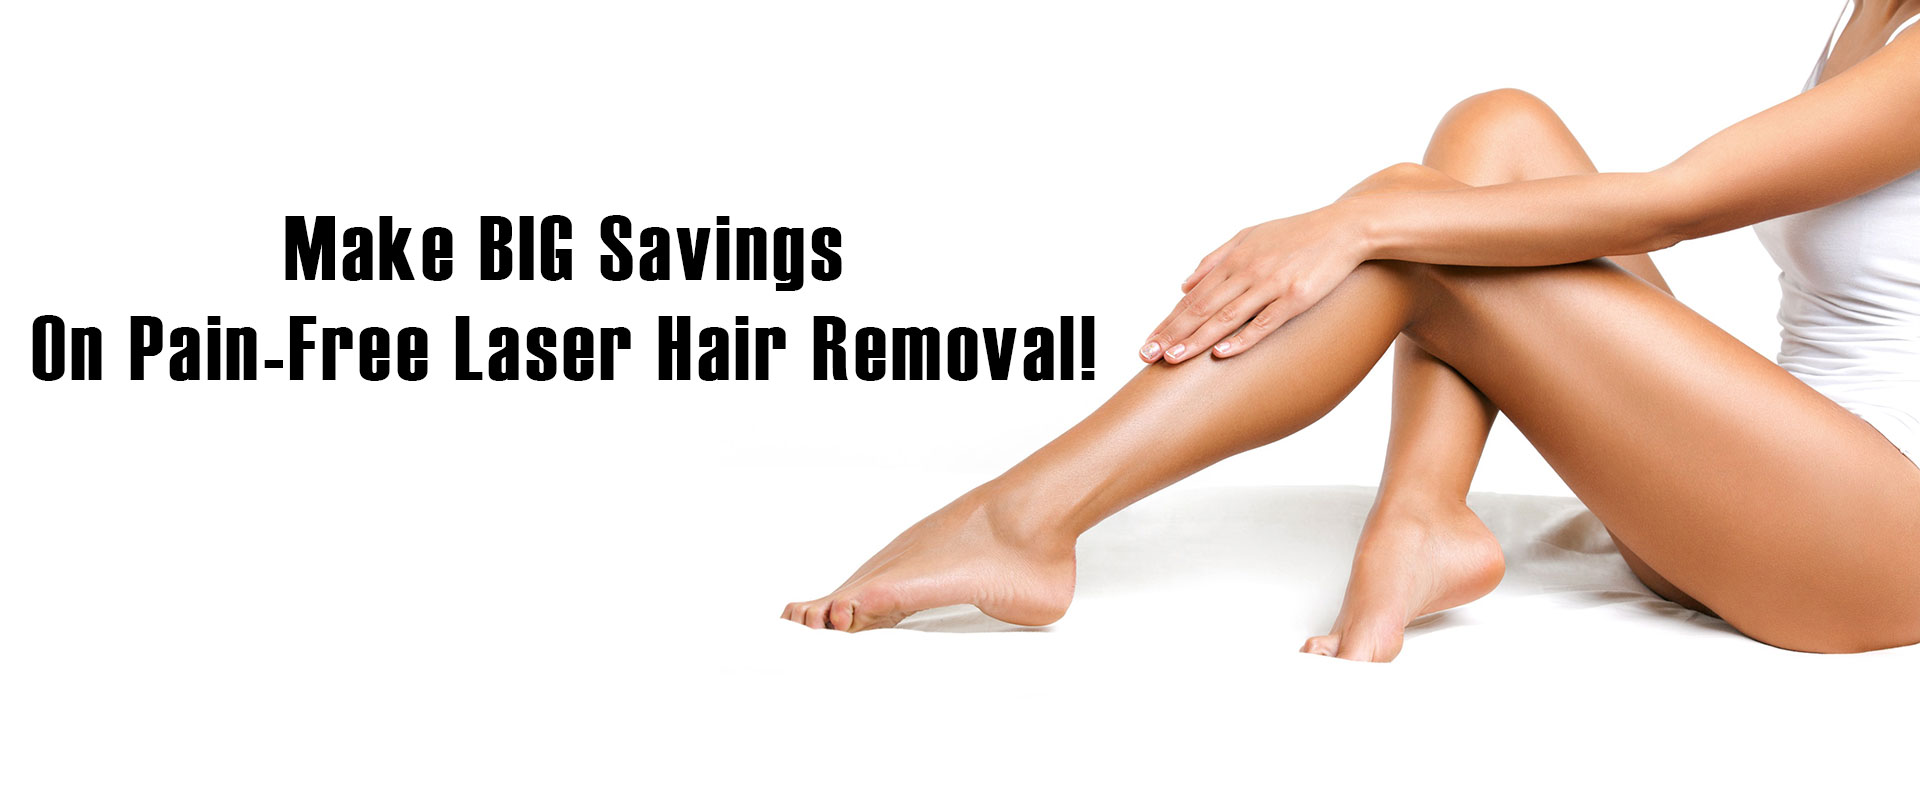 FREE LASER HAIR REMOVAL!